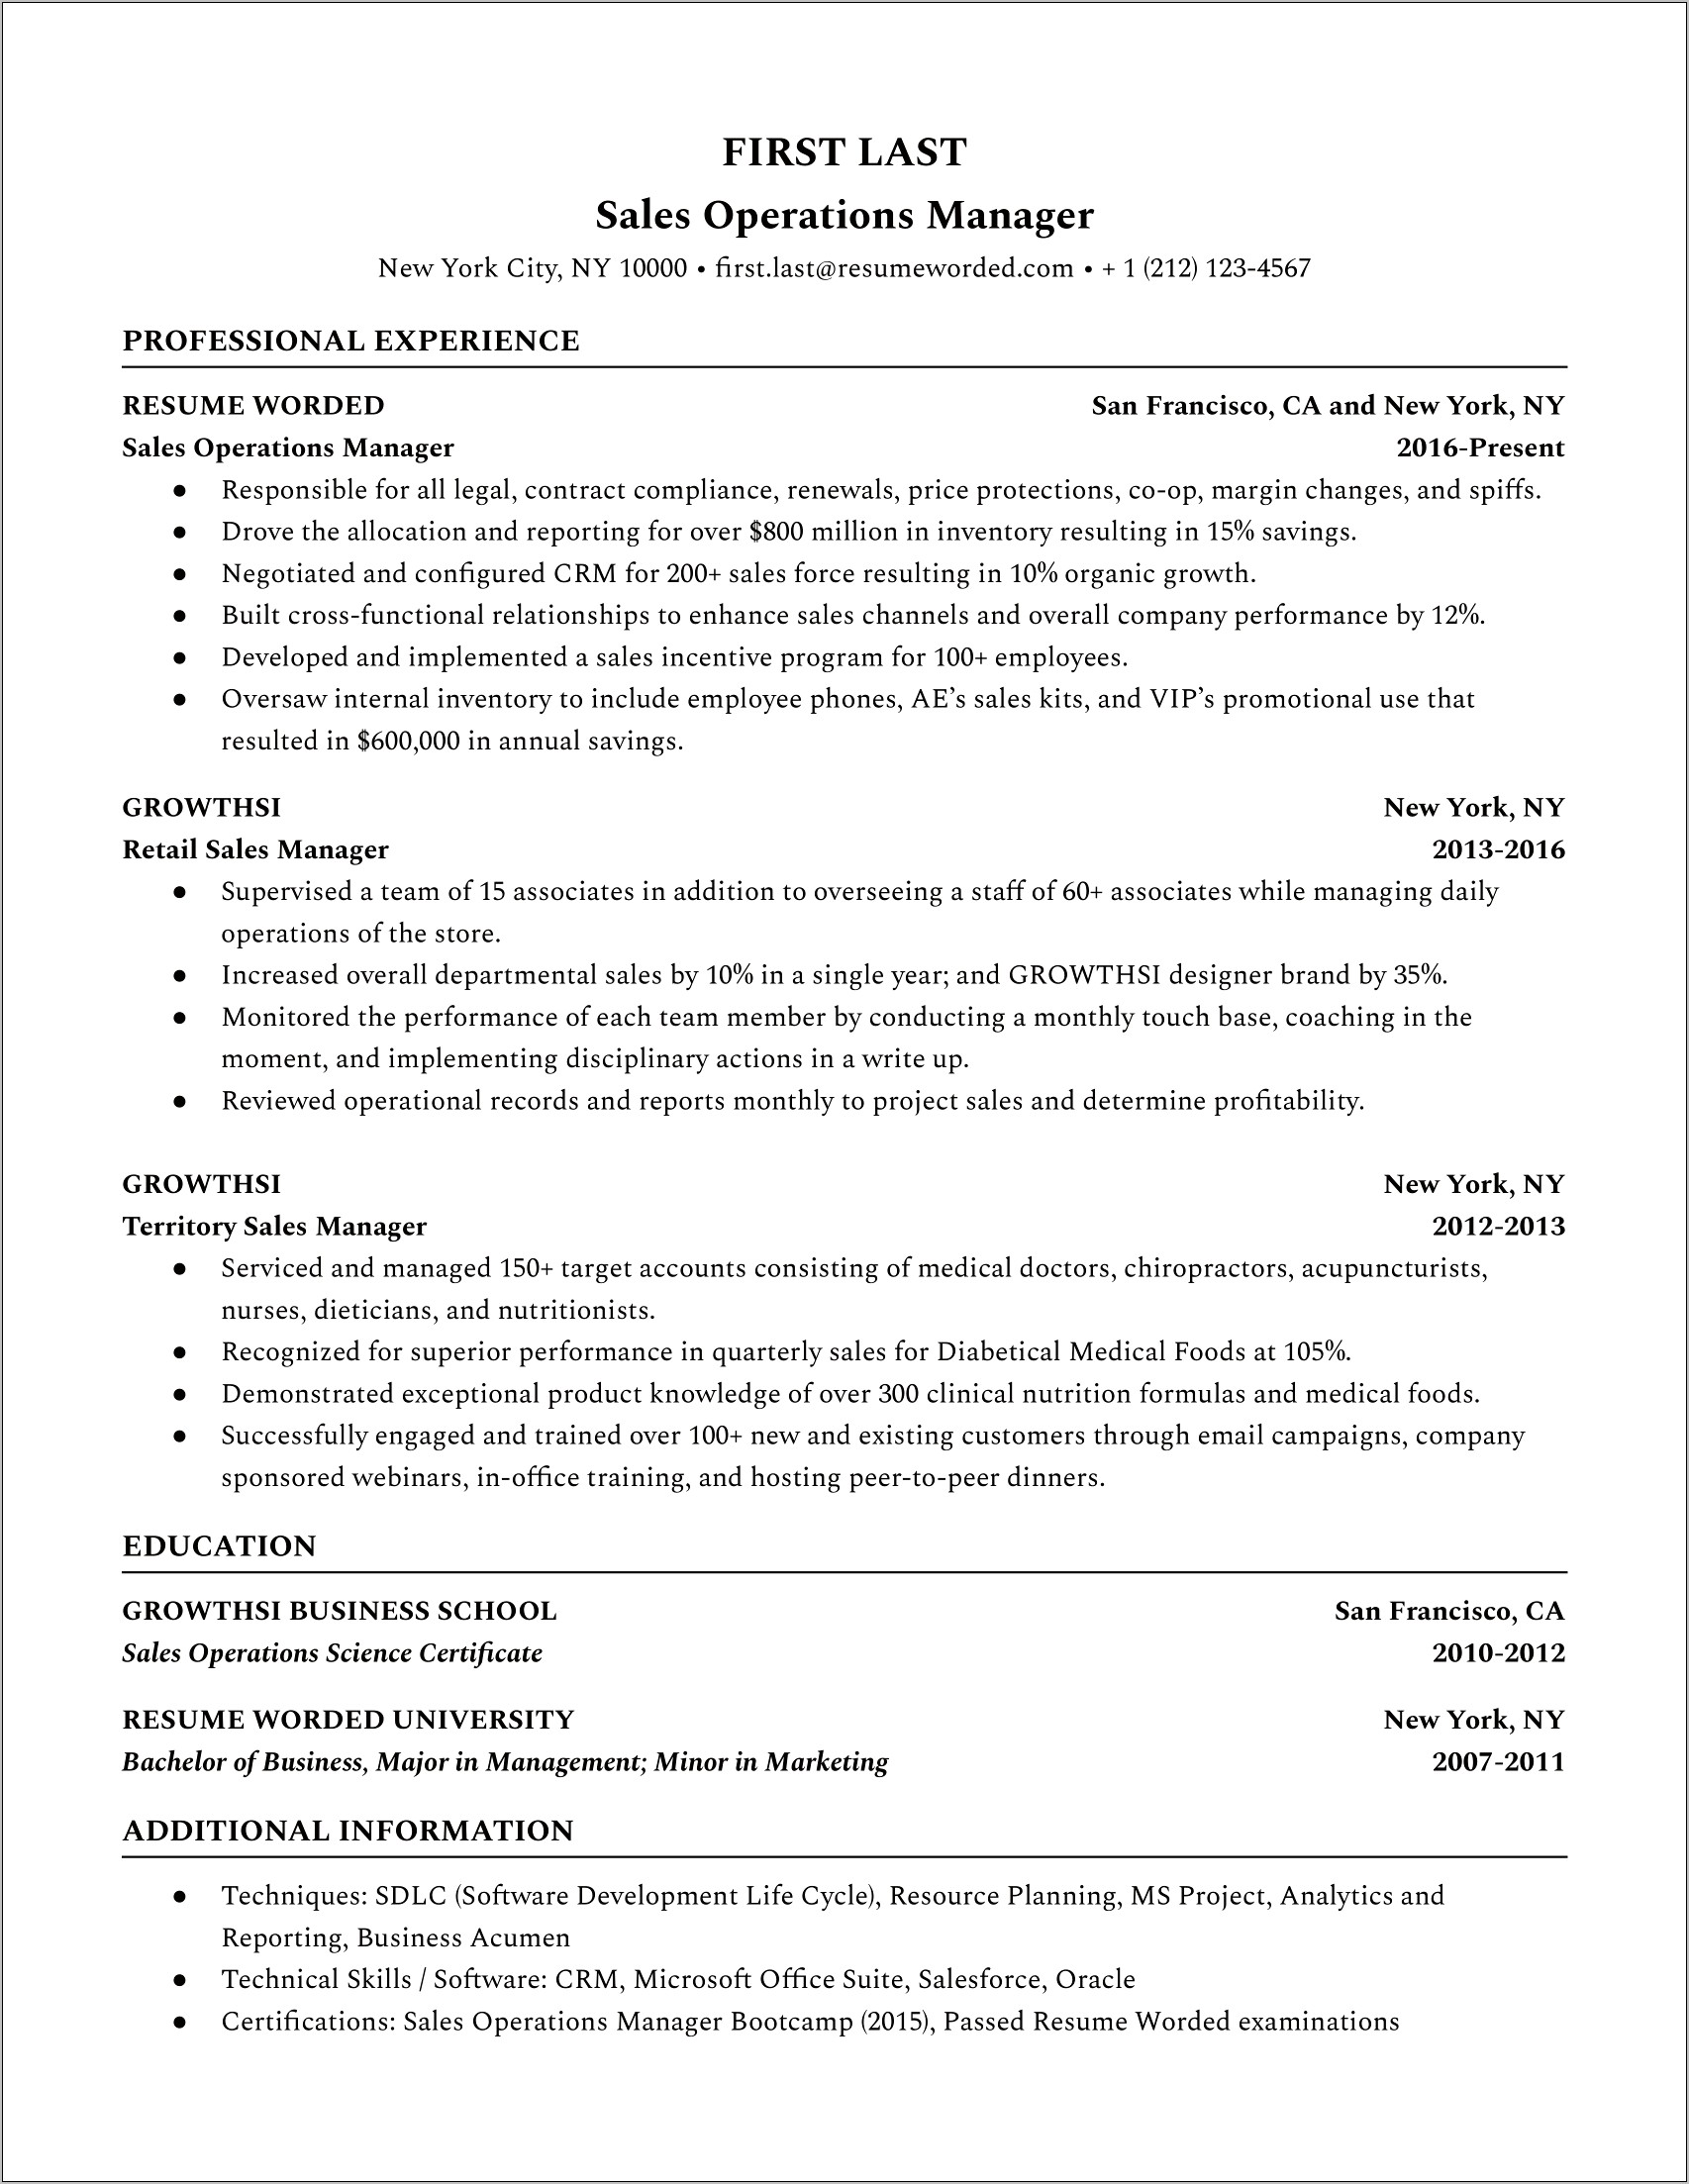 Resumes For Senior Managers In Operations Role